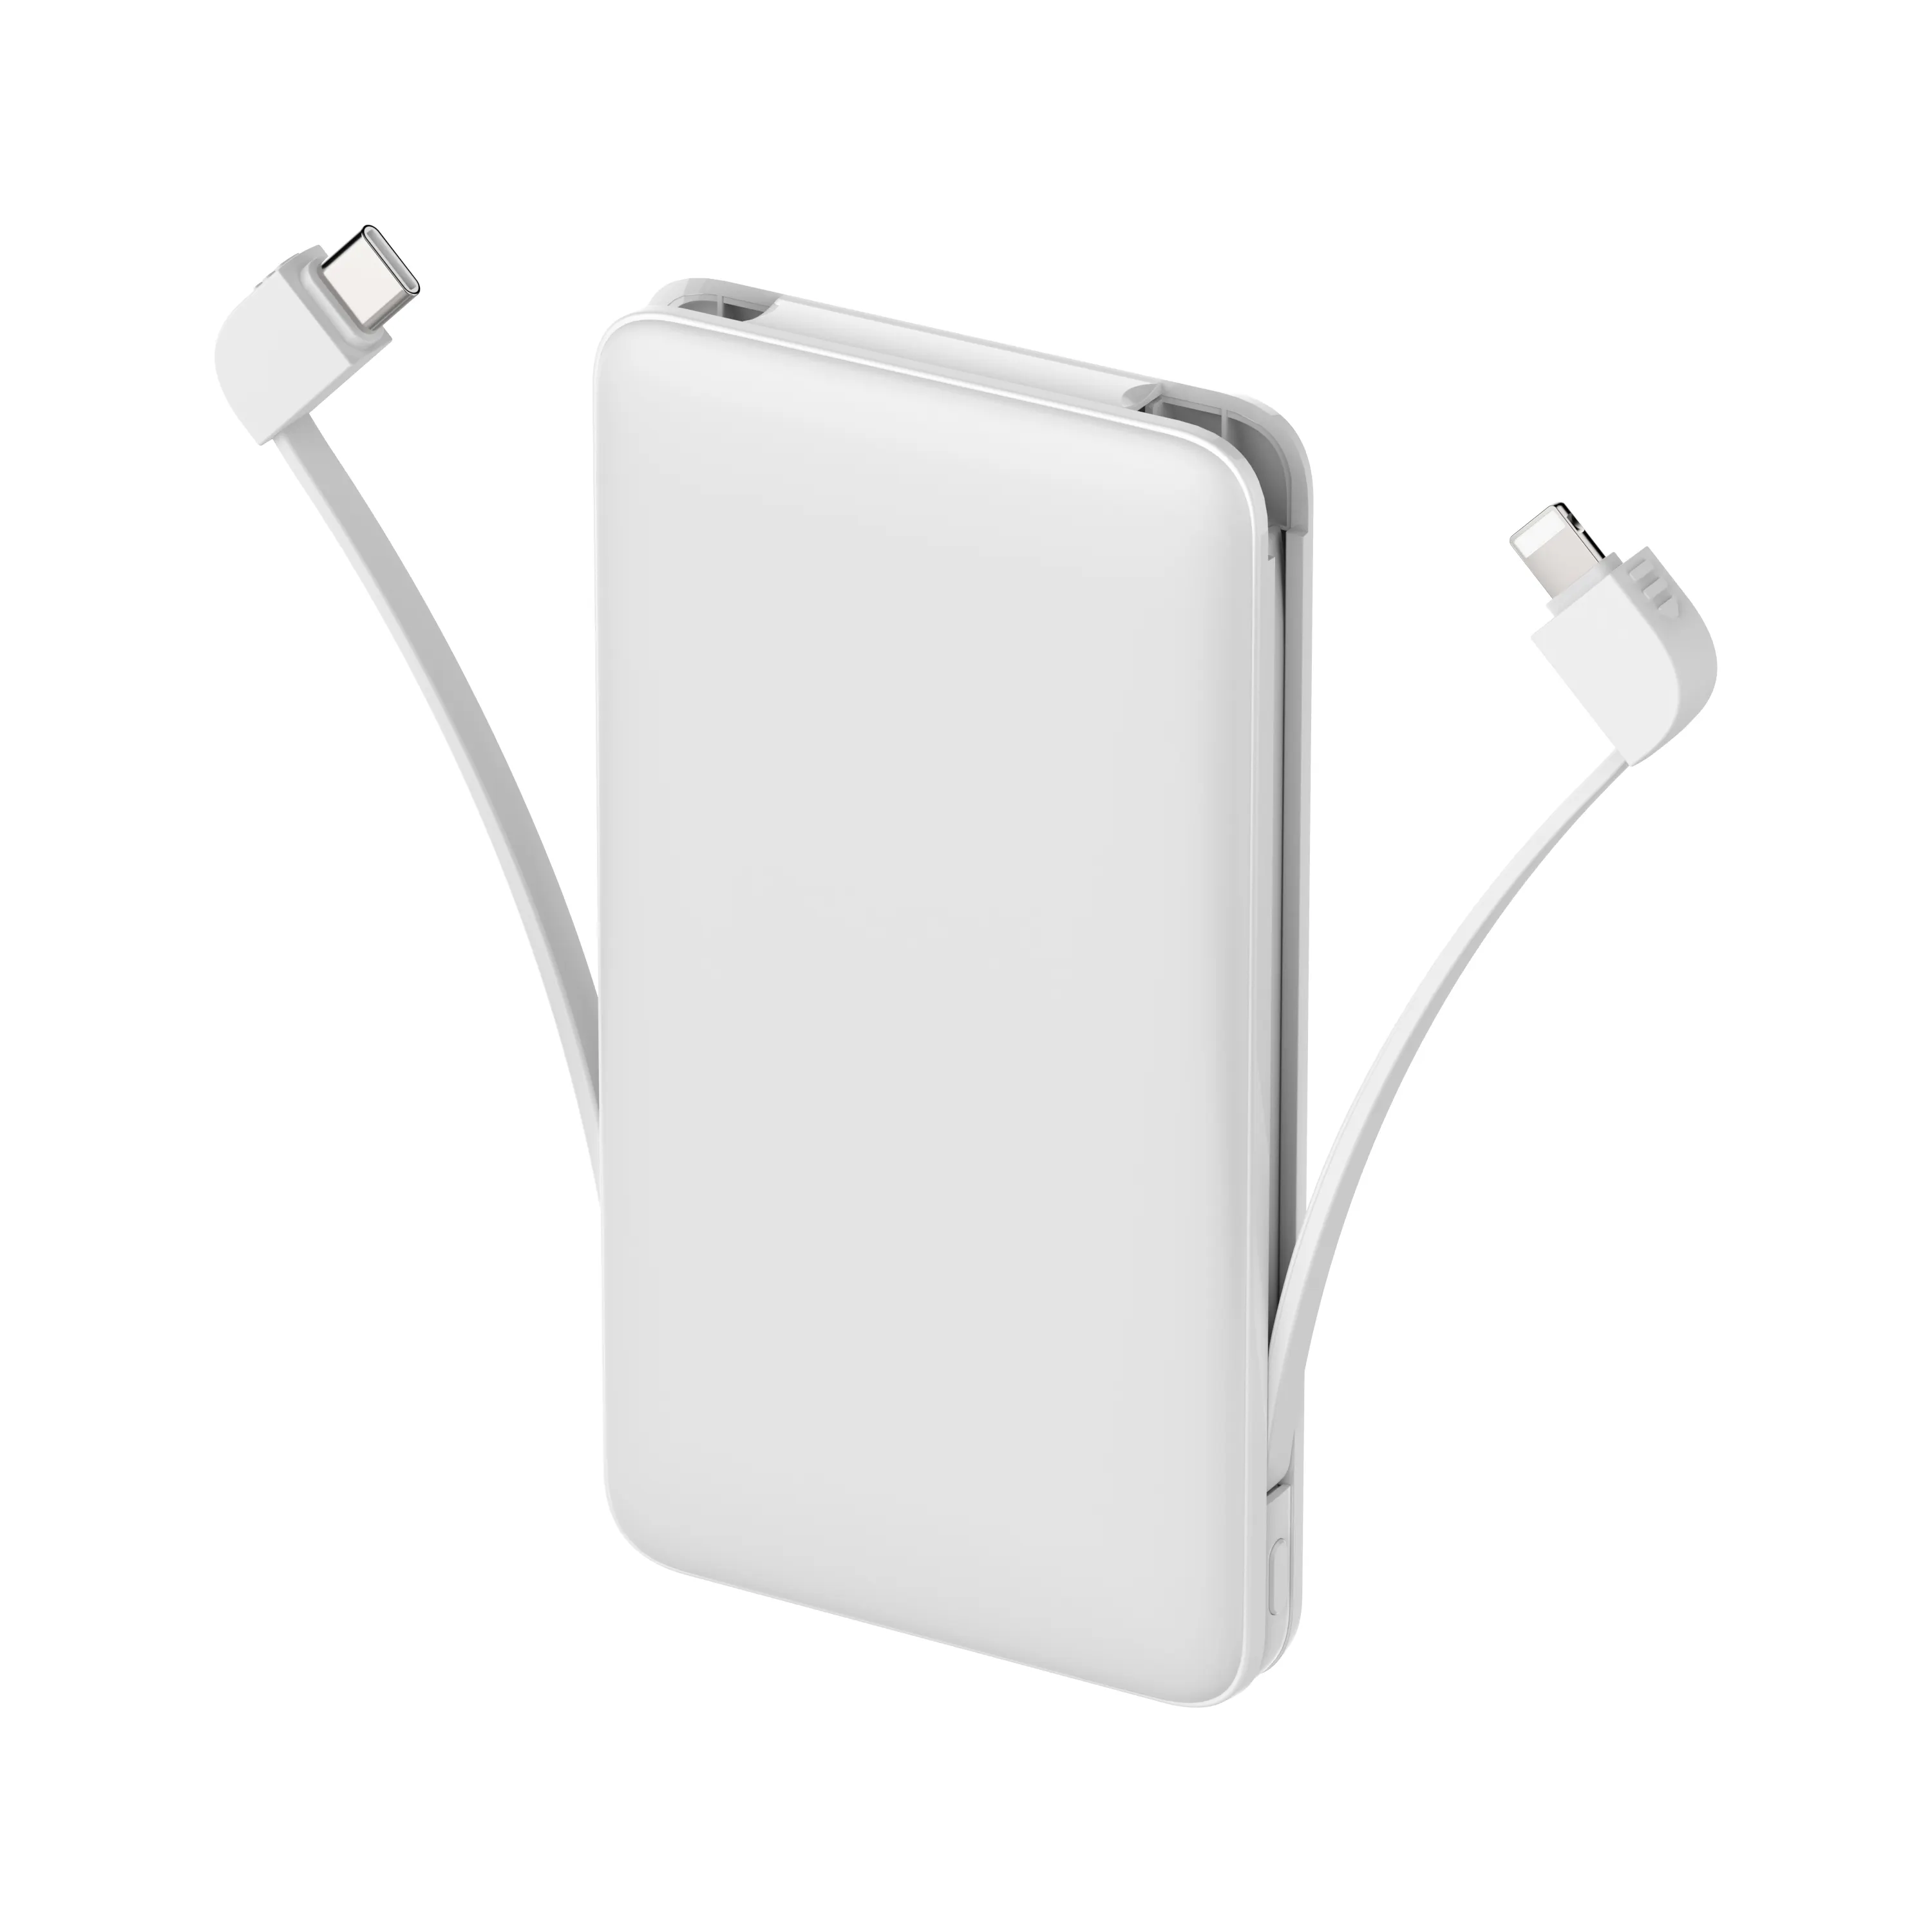 OKZU factory new model portable power bank dual built-in cable PD power bank 10000mah fast charge 22.5W